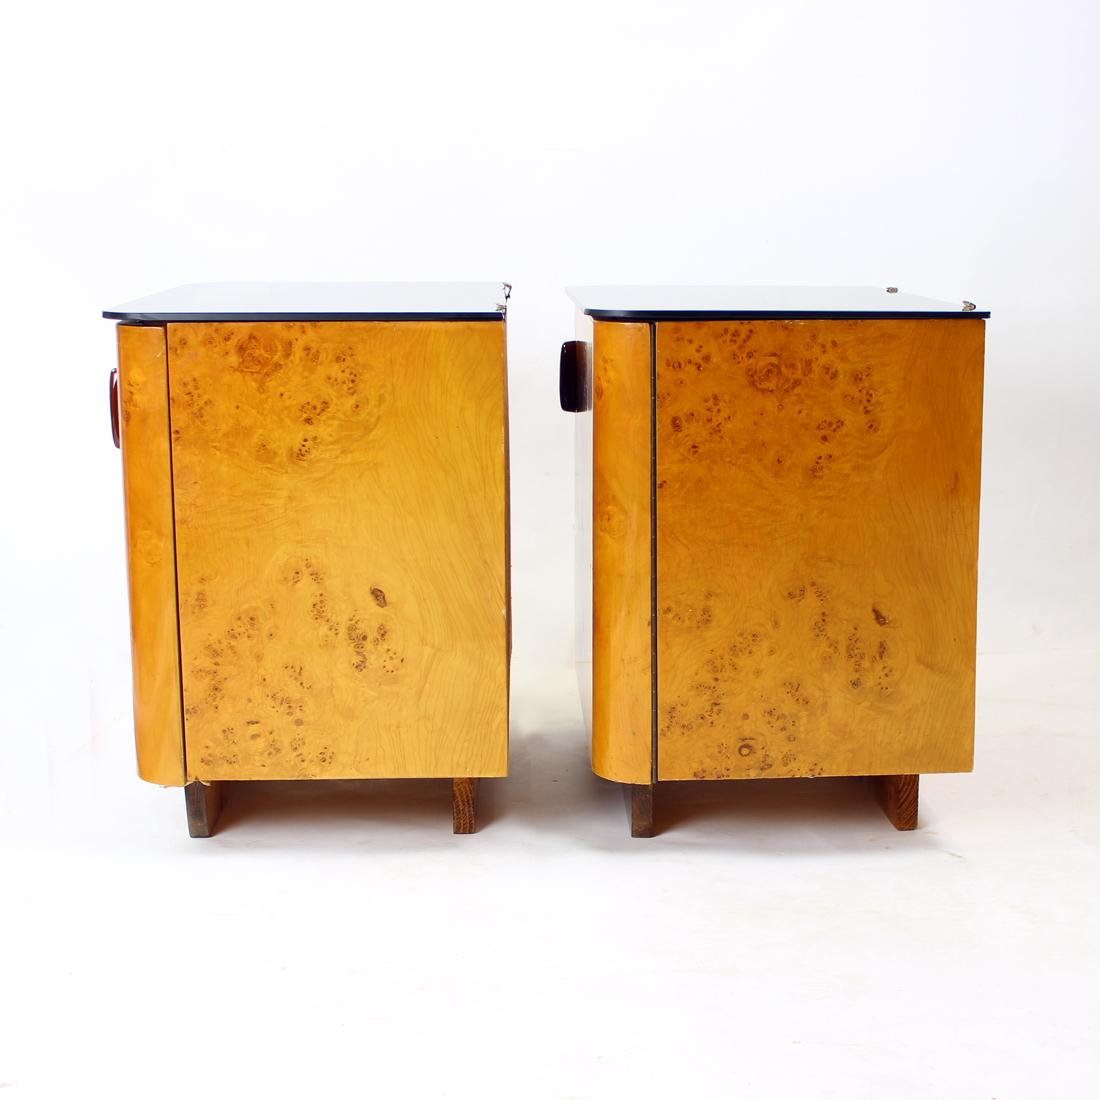 Set of Two Bedside Tables in Wood & Glass, Czechoslovakia, 1940s For Sale 3